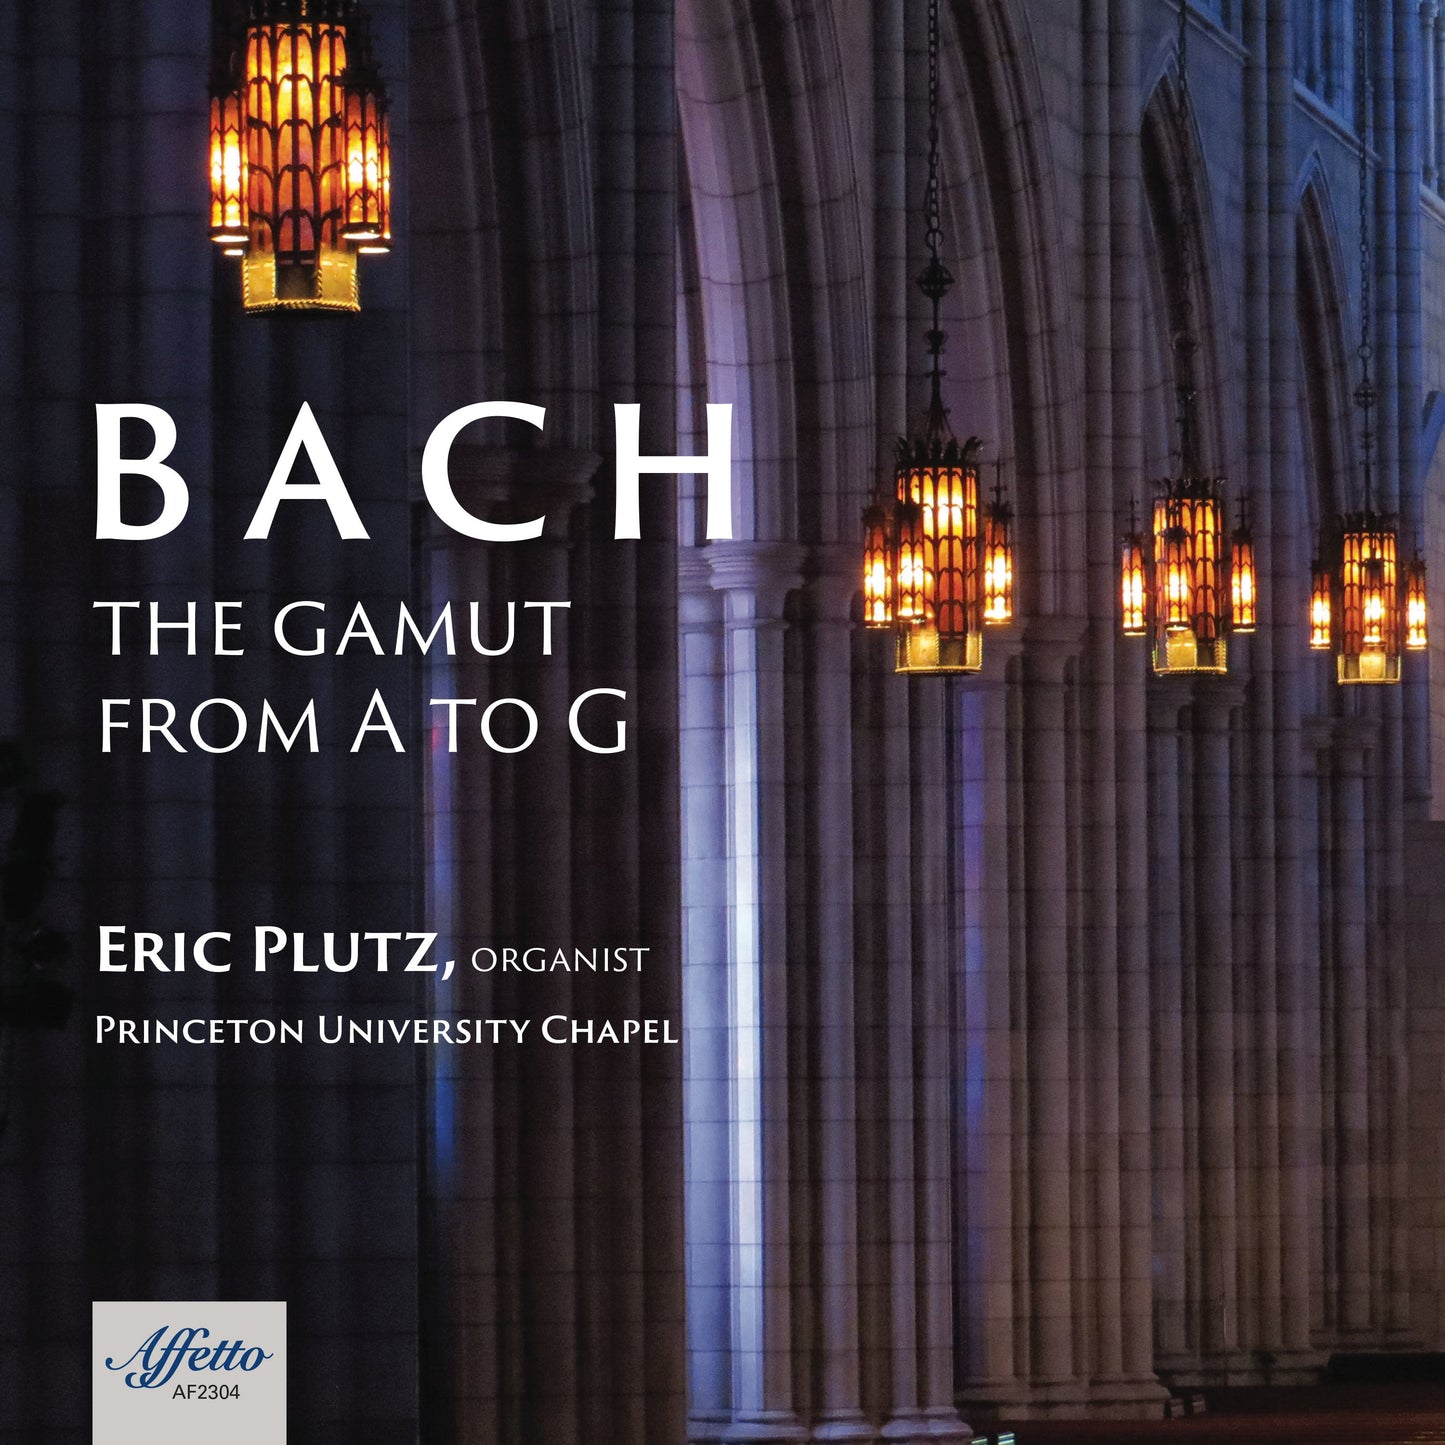 J.S. Bach: The Gamut From A To G